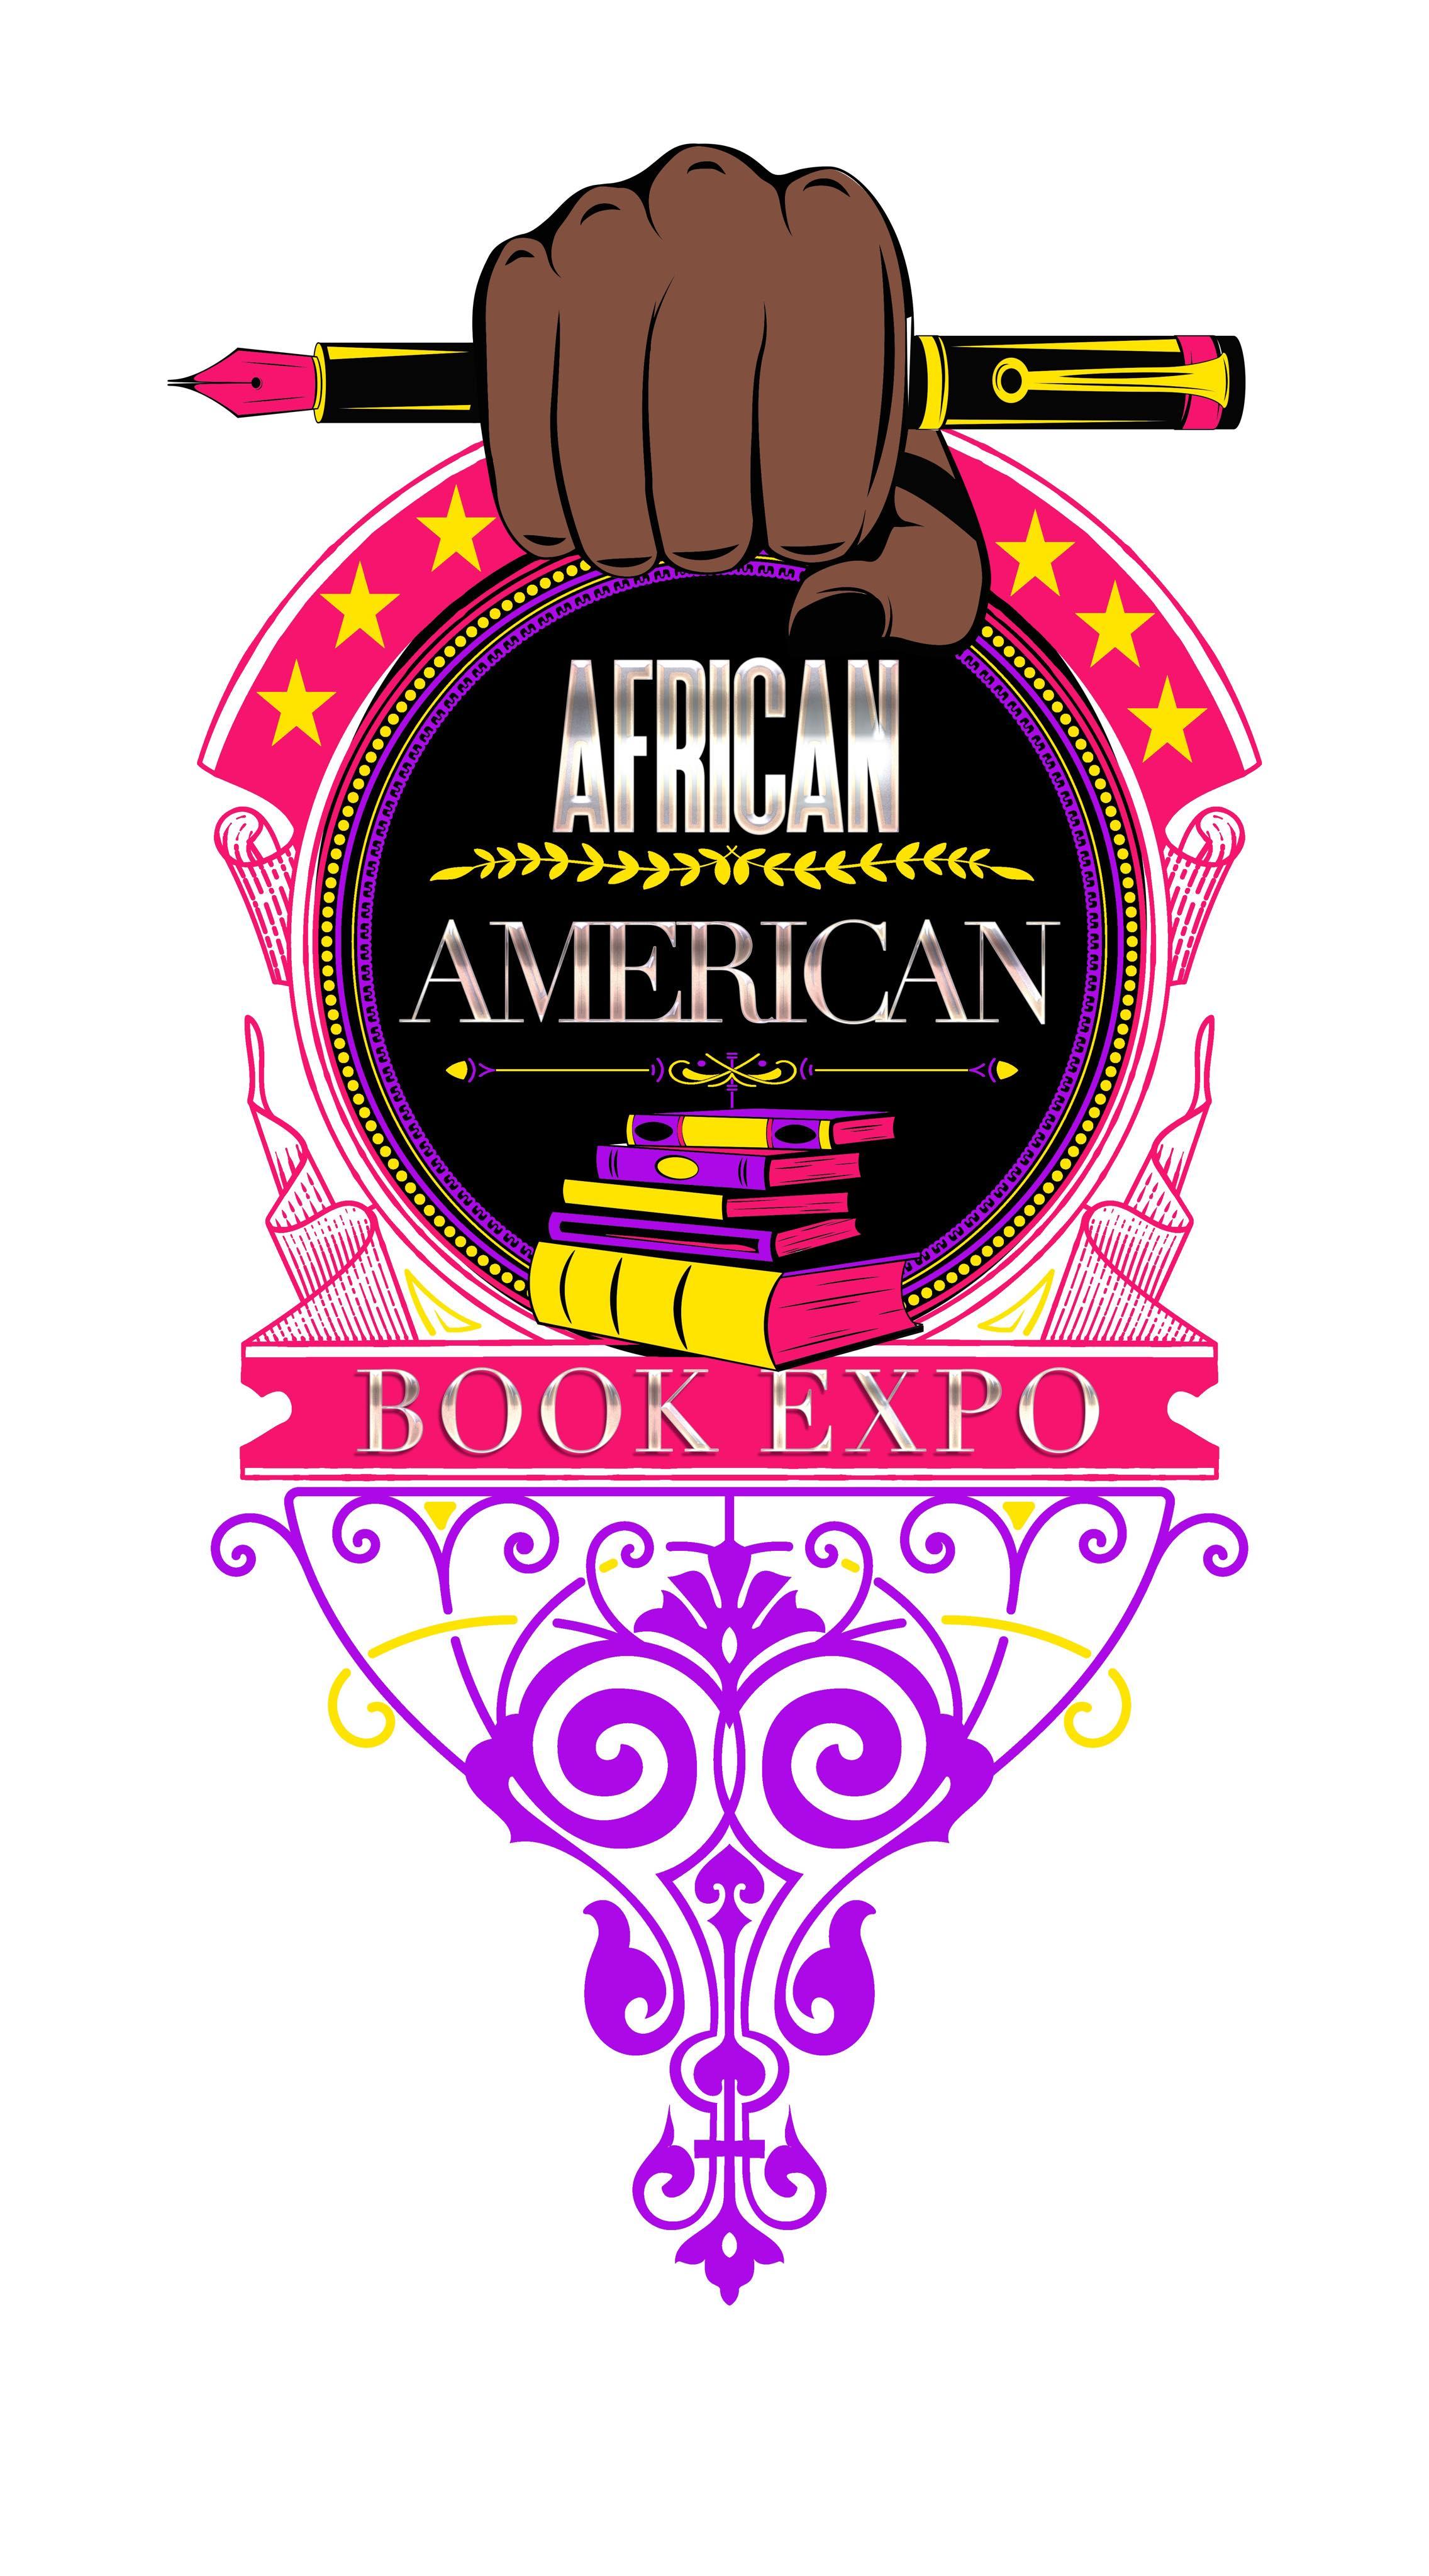 African American Book Expo Plus Mixer-New York